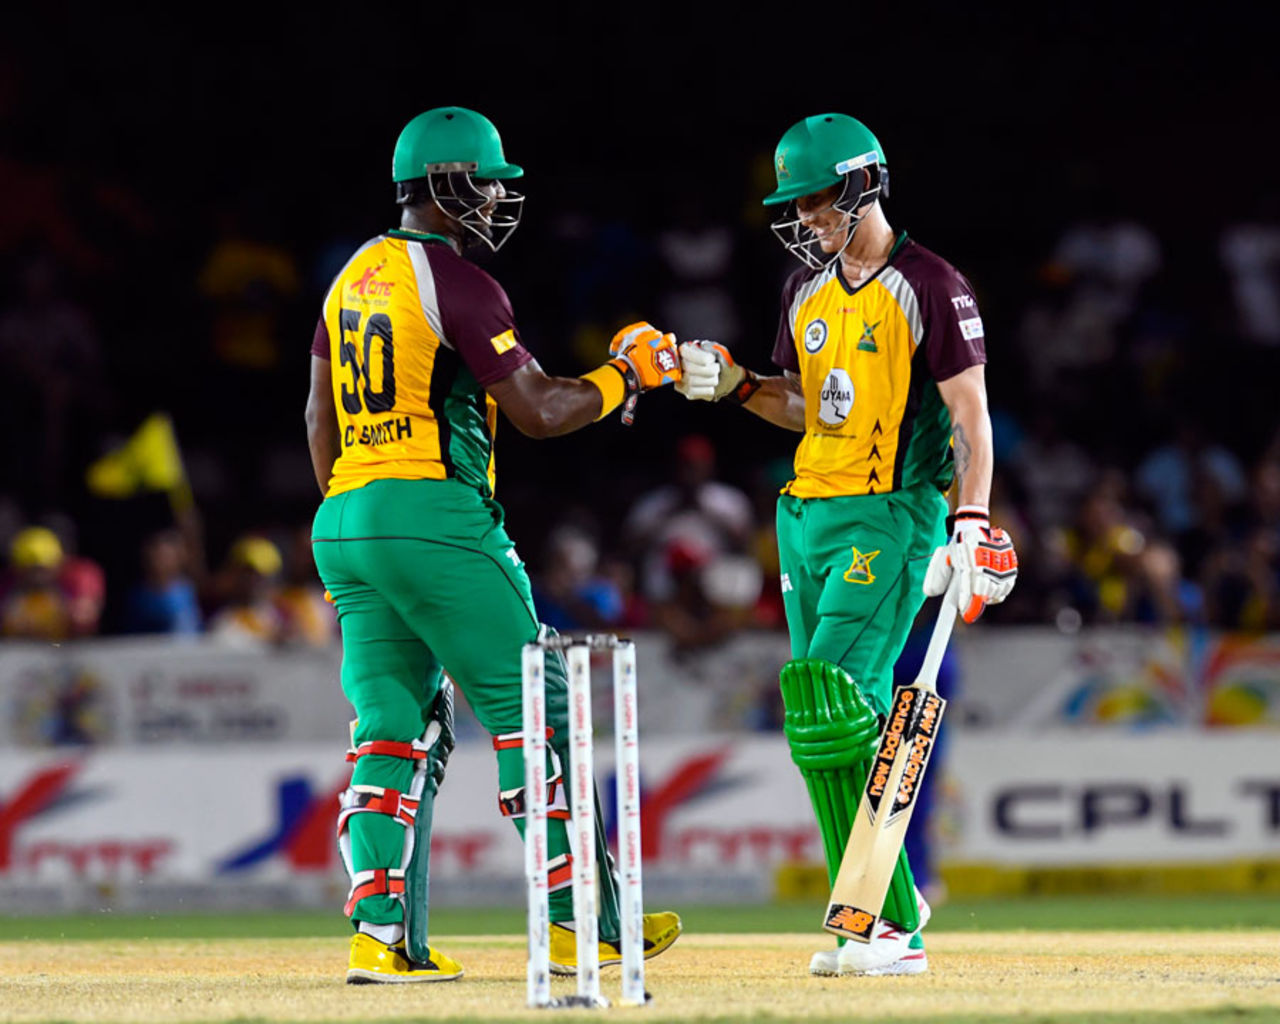 Dwayne Smith and Nic Maddinson have a chat during their stand of 92, Barbados Tridents v Guyana Amazon Warriors, CPL 2016, Lauderhill, July 28, 2016